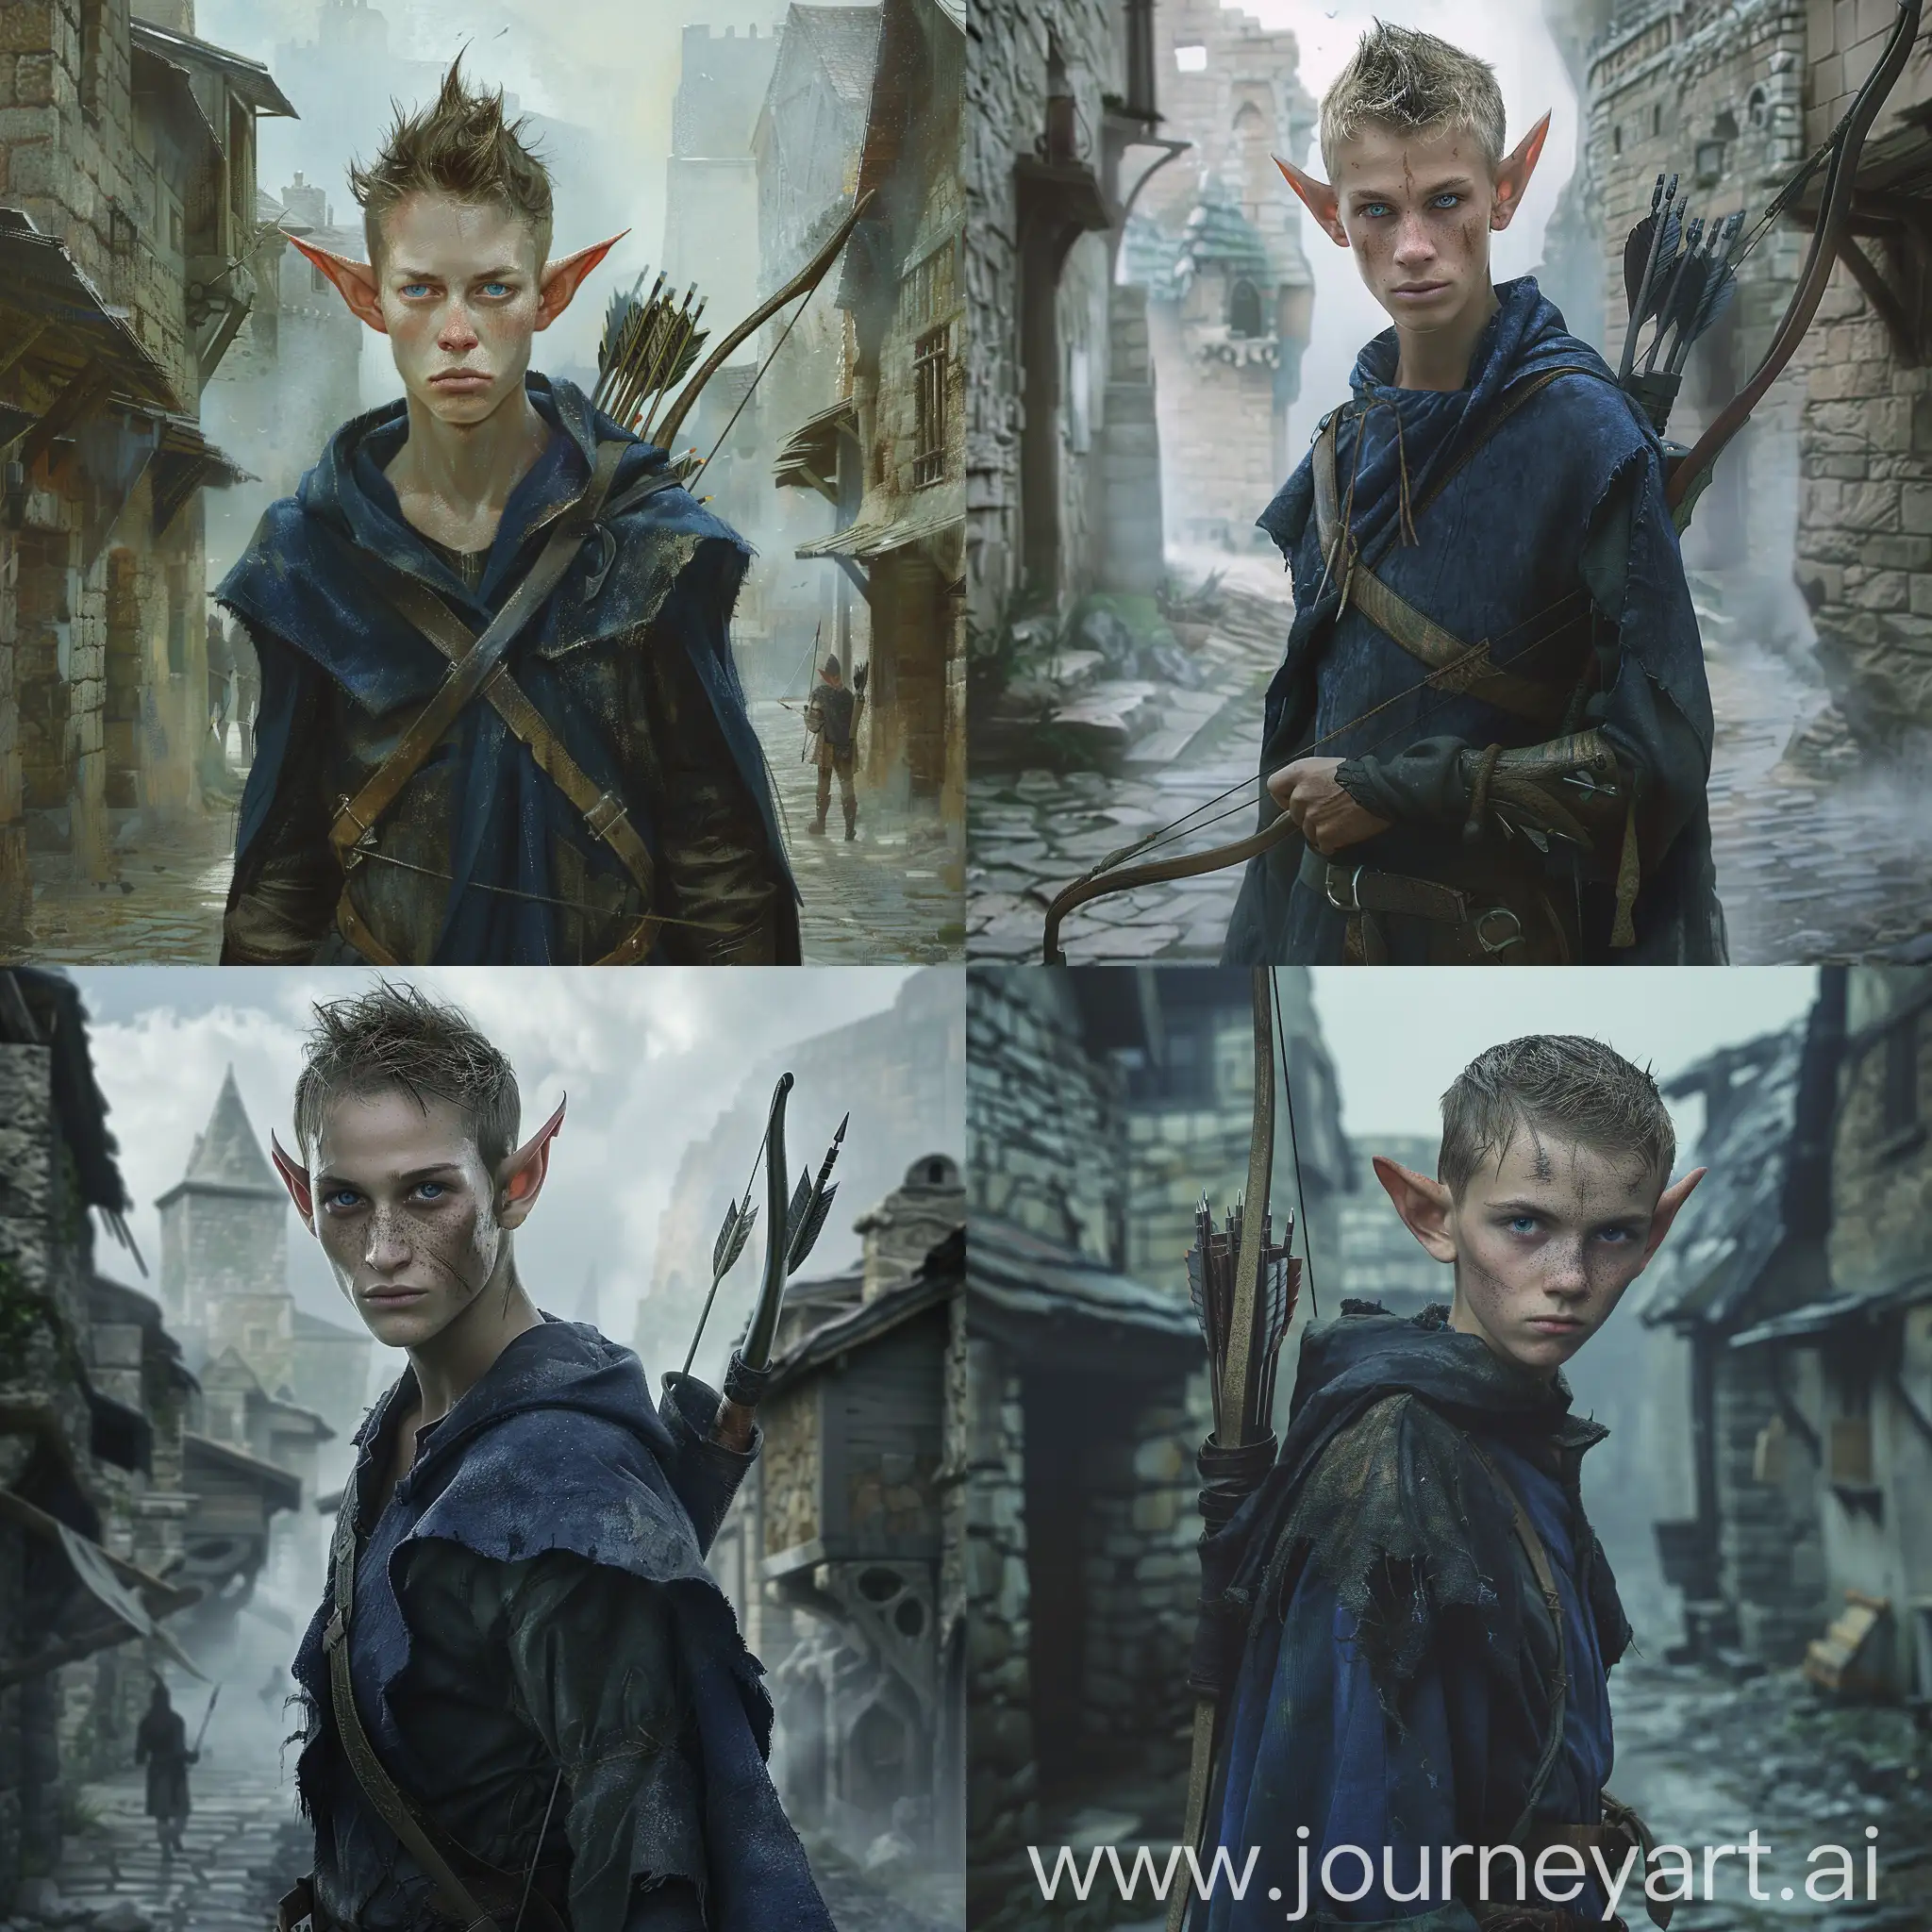 A young thin elf with pointed ears, thin cheeks and sharp cheekbones, natural blue eyes. He is dressed in a dark blue, almost black, worn dusty cloak, with a bow and a quiver of arrows on his back. An elf stands in the middle of a medieval stone town. He looks wary, he's on guard. The weather is cloudy, it's a little foggy outside.